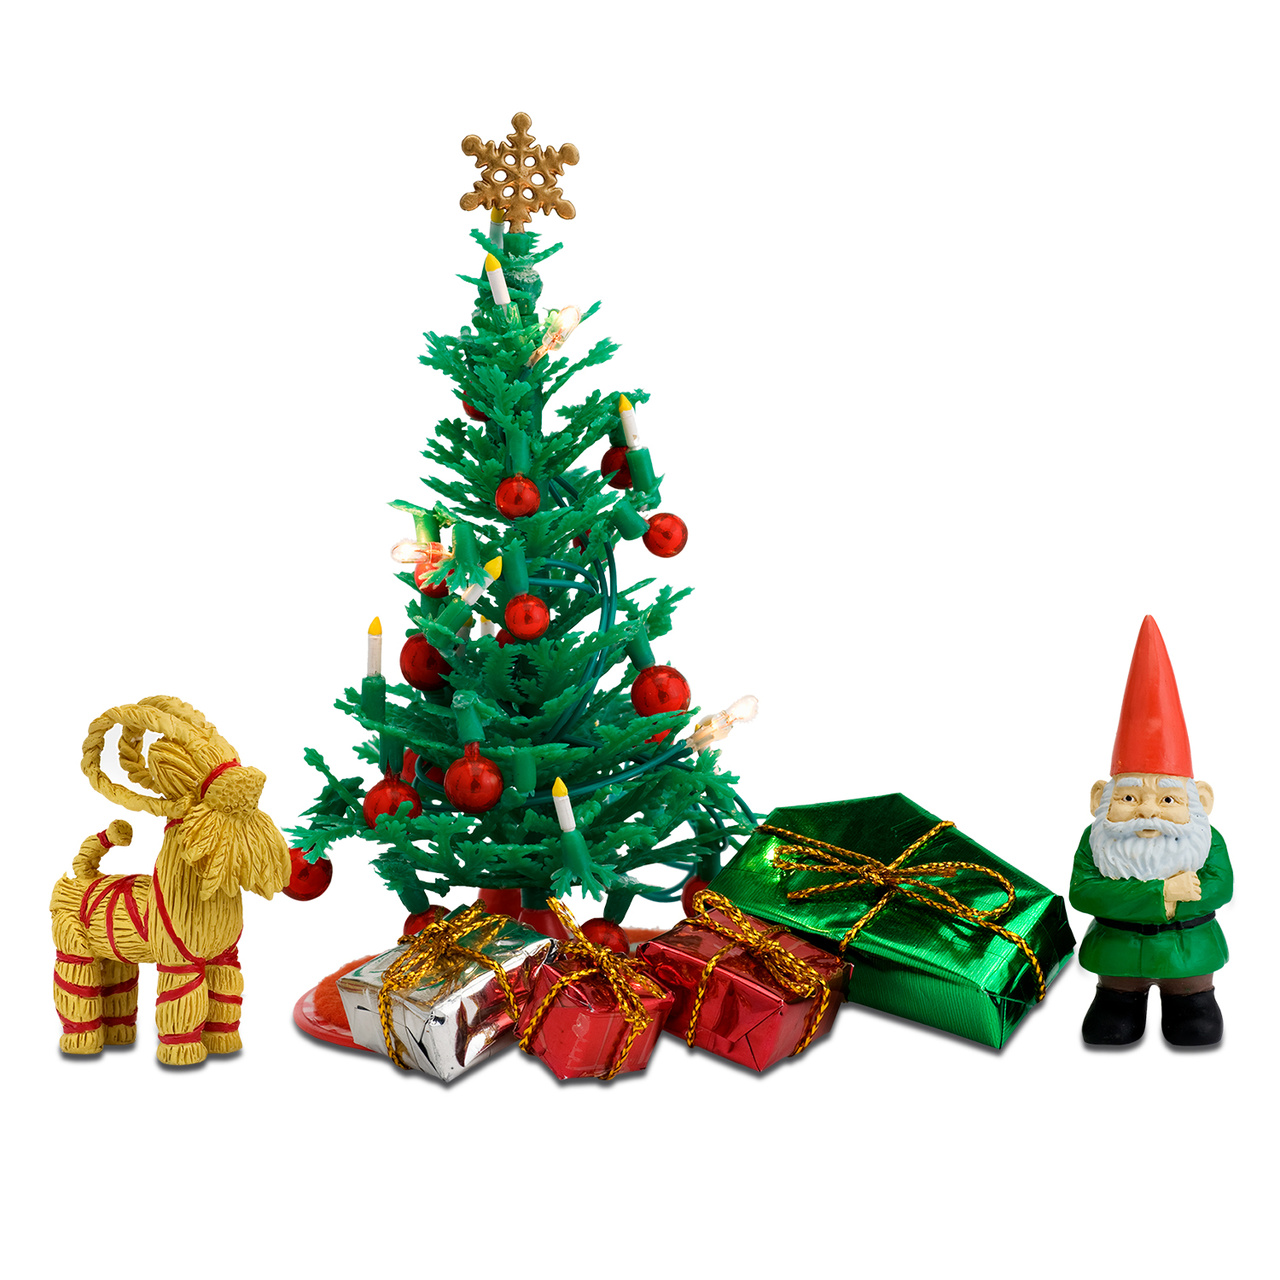 Doll house lighting lundby doll house accessories christmas set with lighting